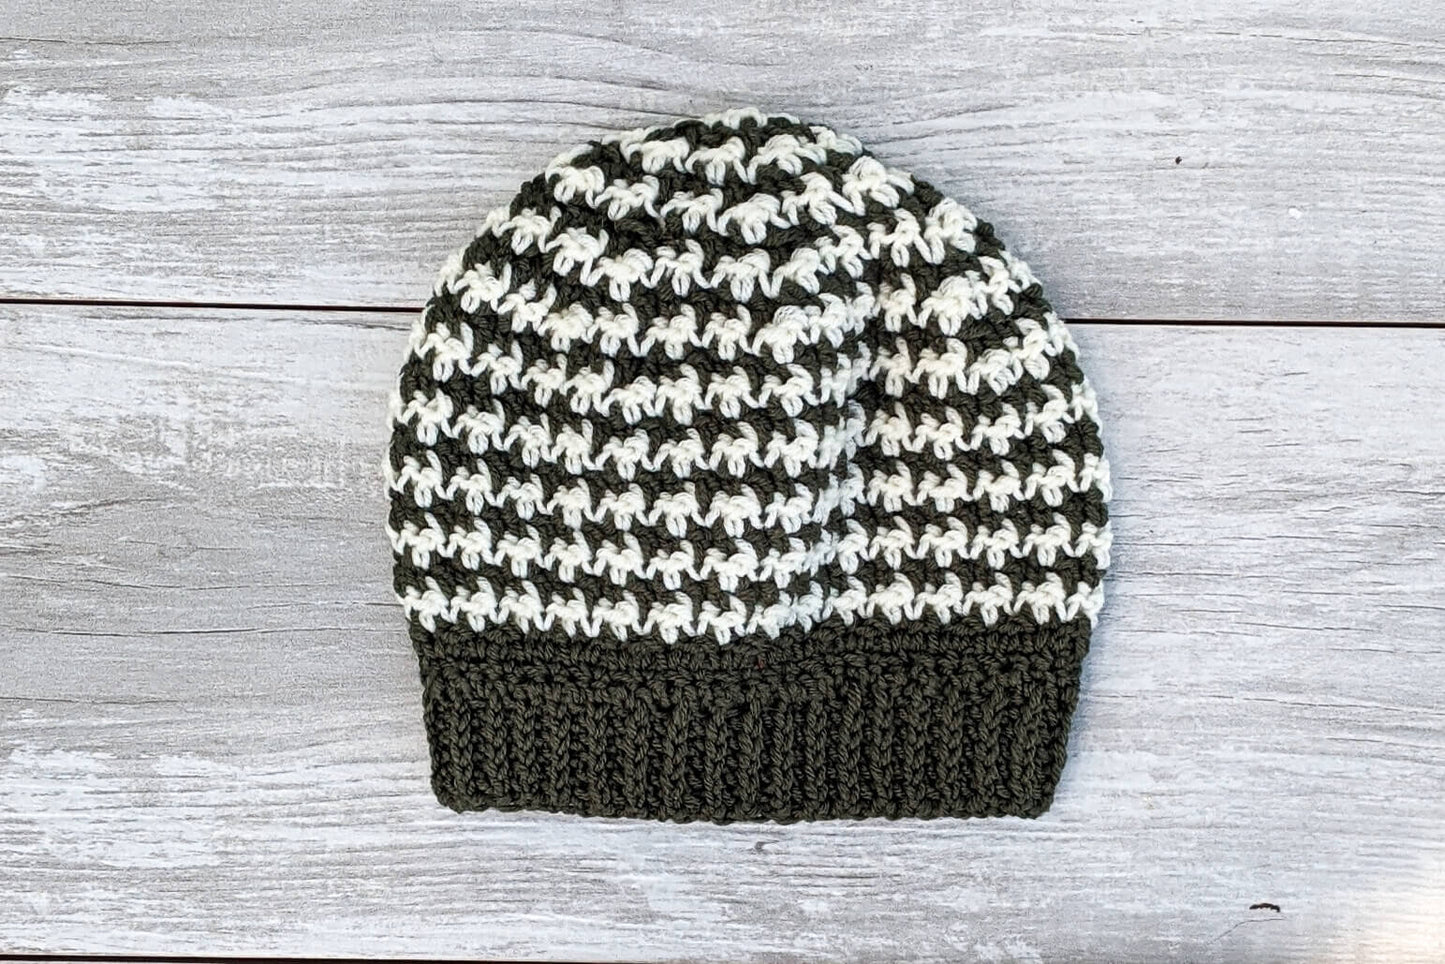 Reversible Houndstooth Beanie